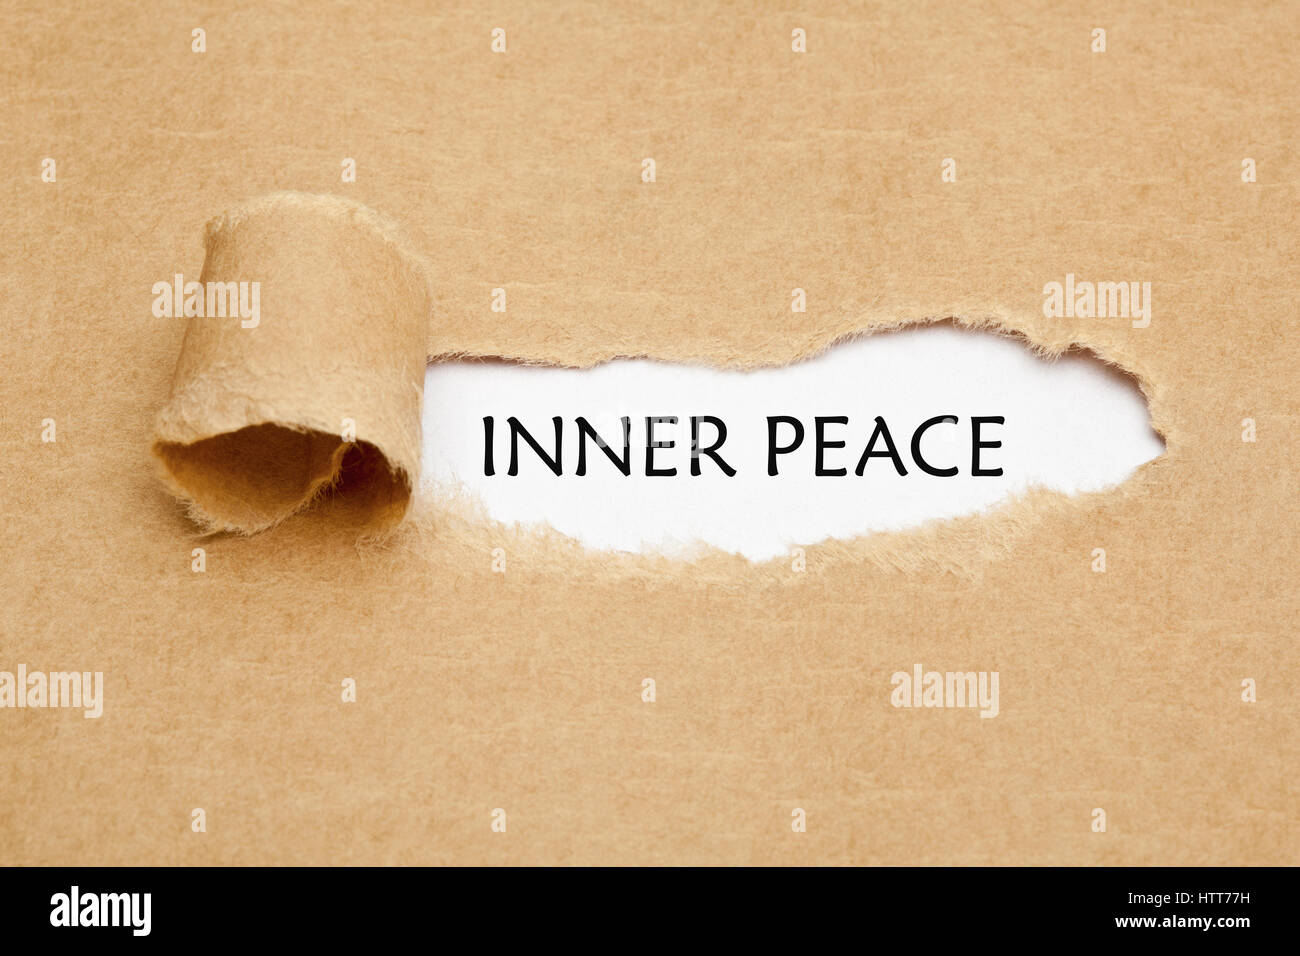 Text Inner Peace appearing behind torn brown paper. Stock Photo